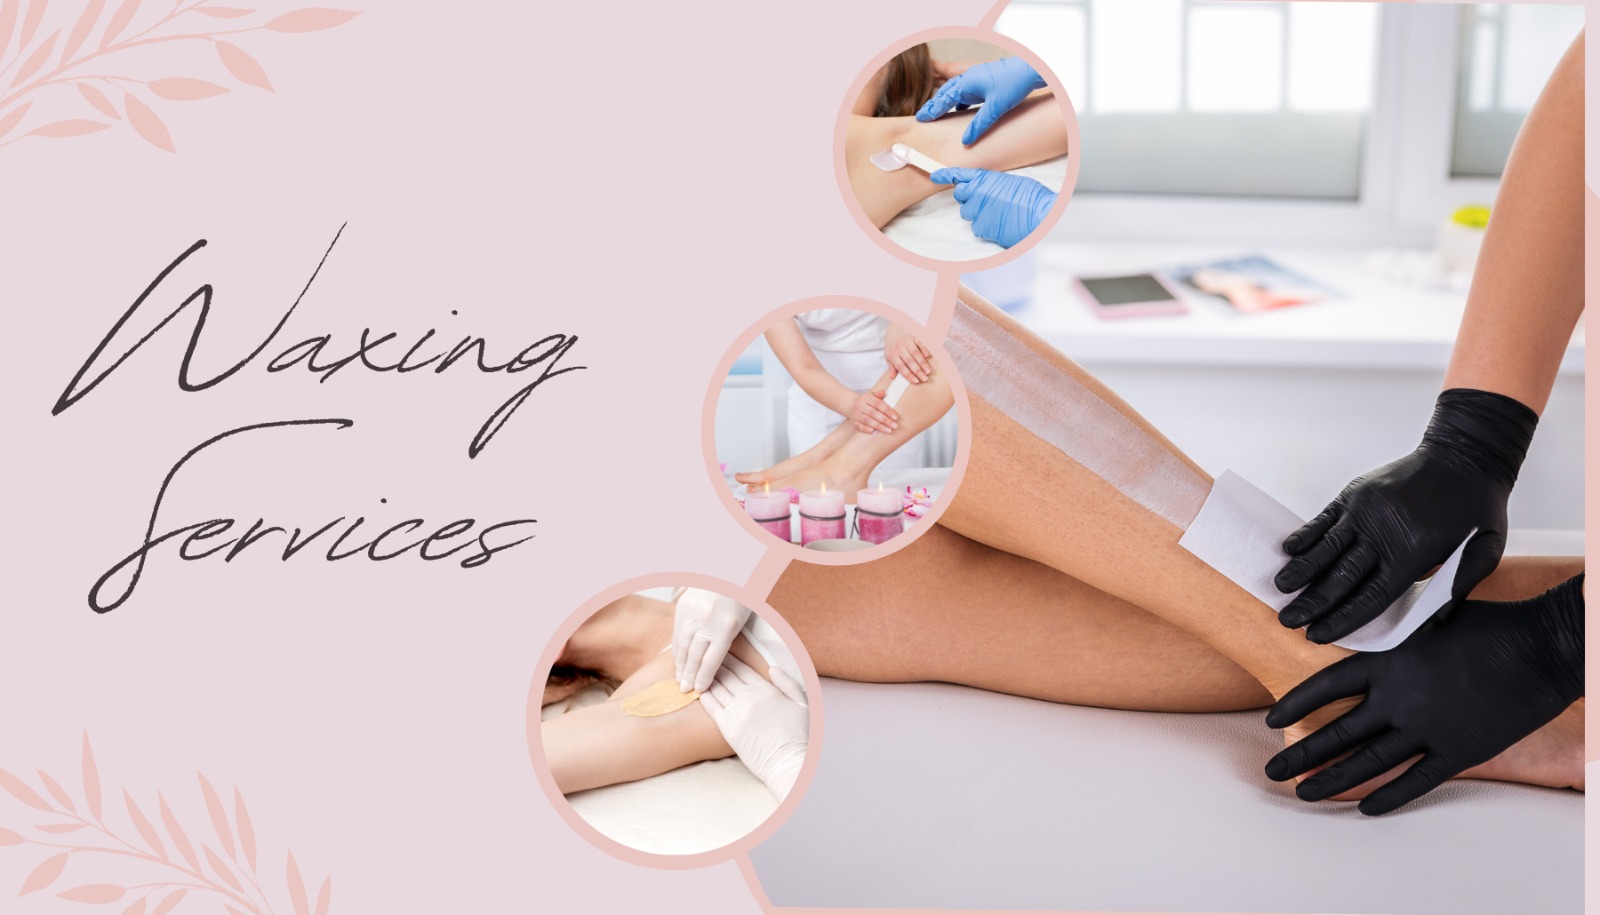 Waxing Services 